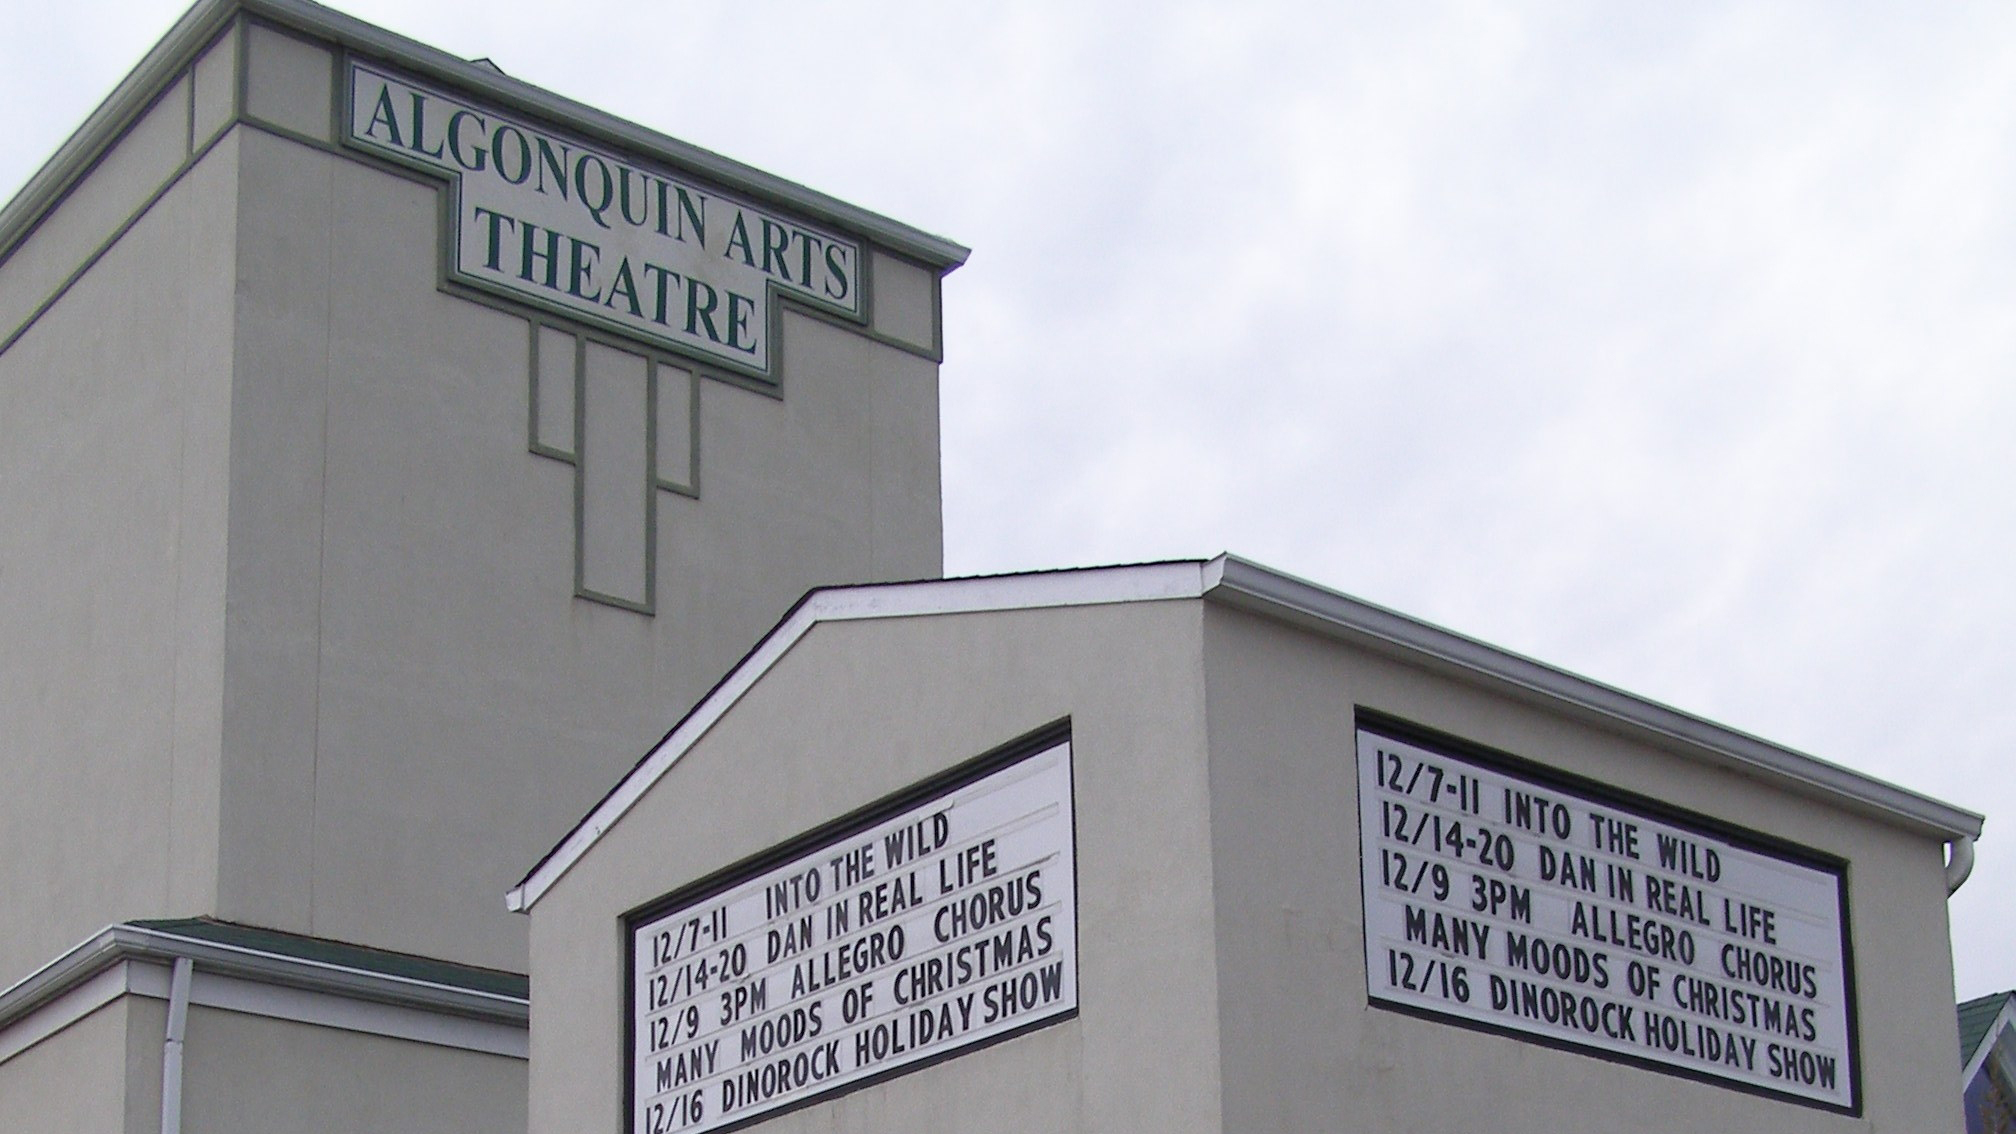 Algonquin Arts Theatre Wins Asbury Park Press 2023 Best of the Best Award for Live Theatre